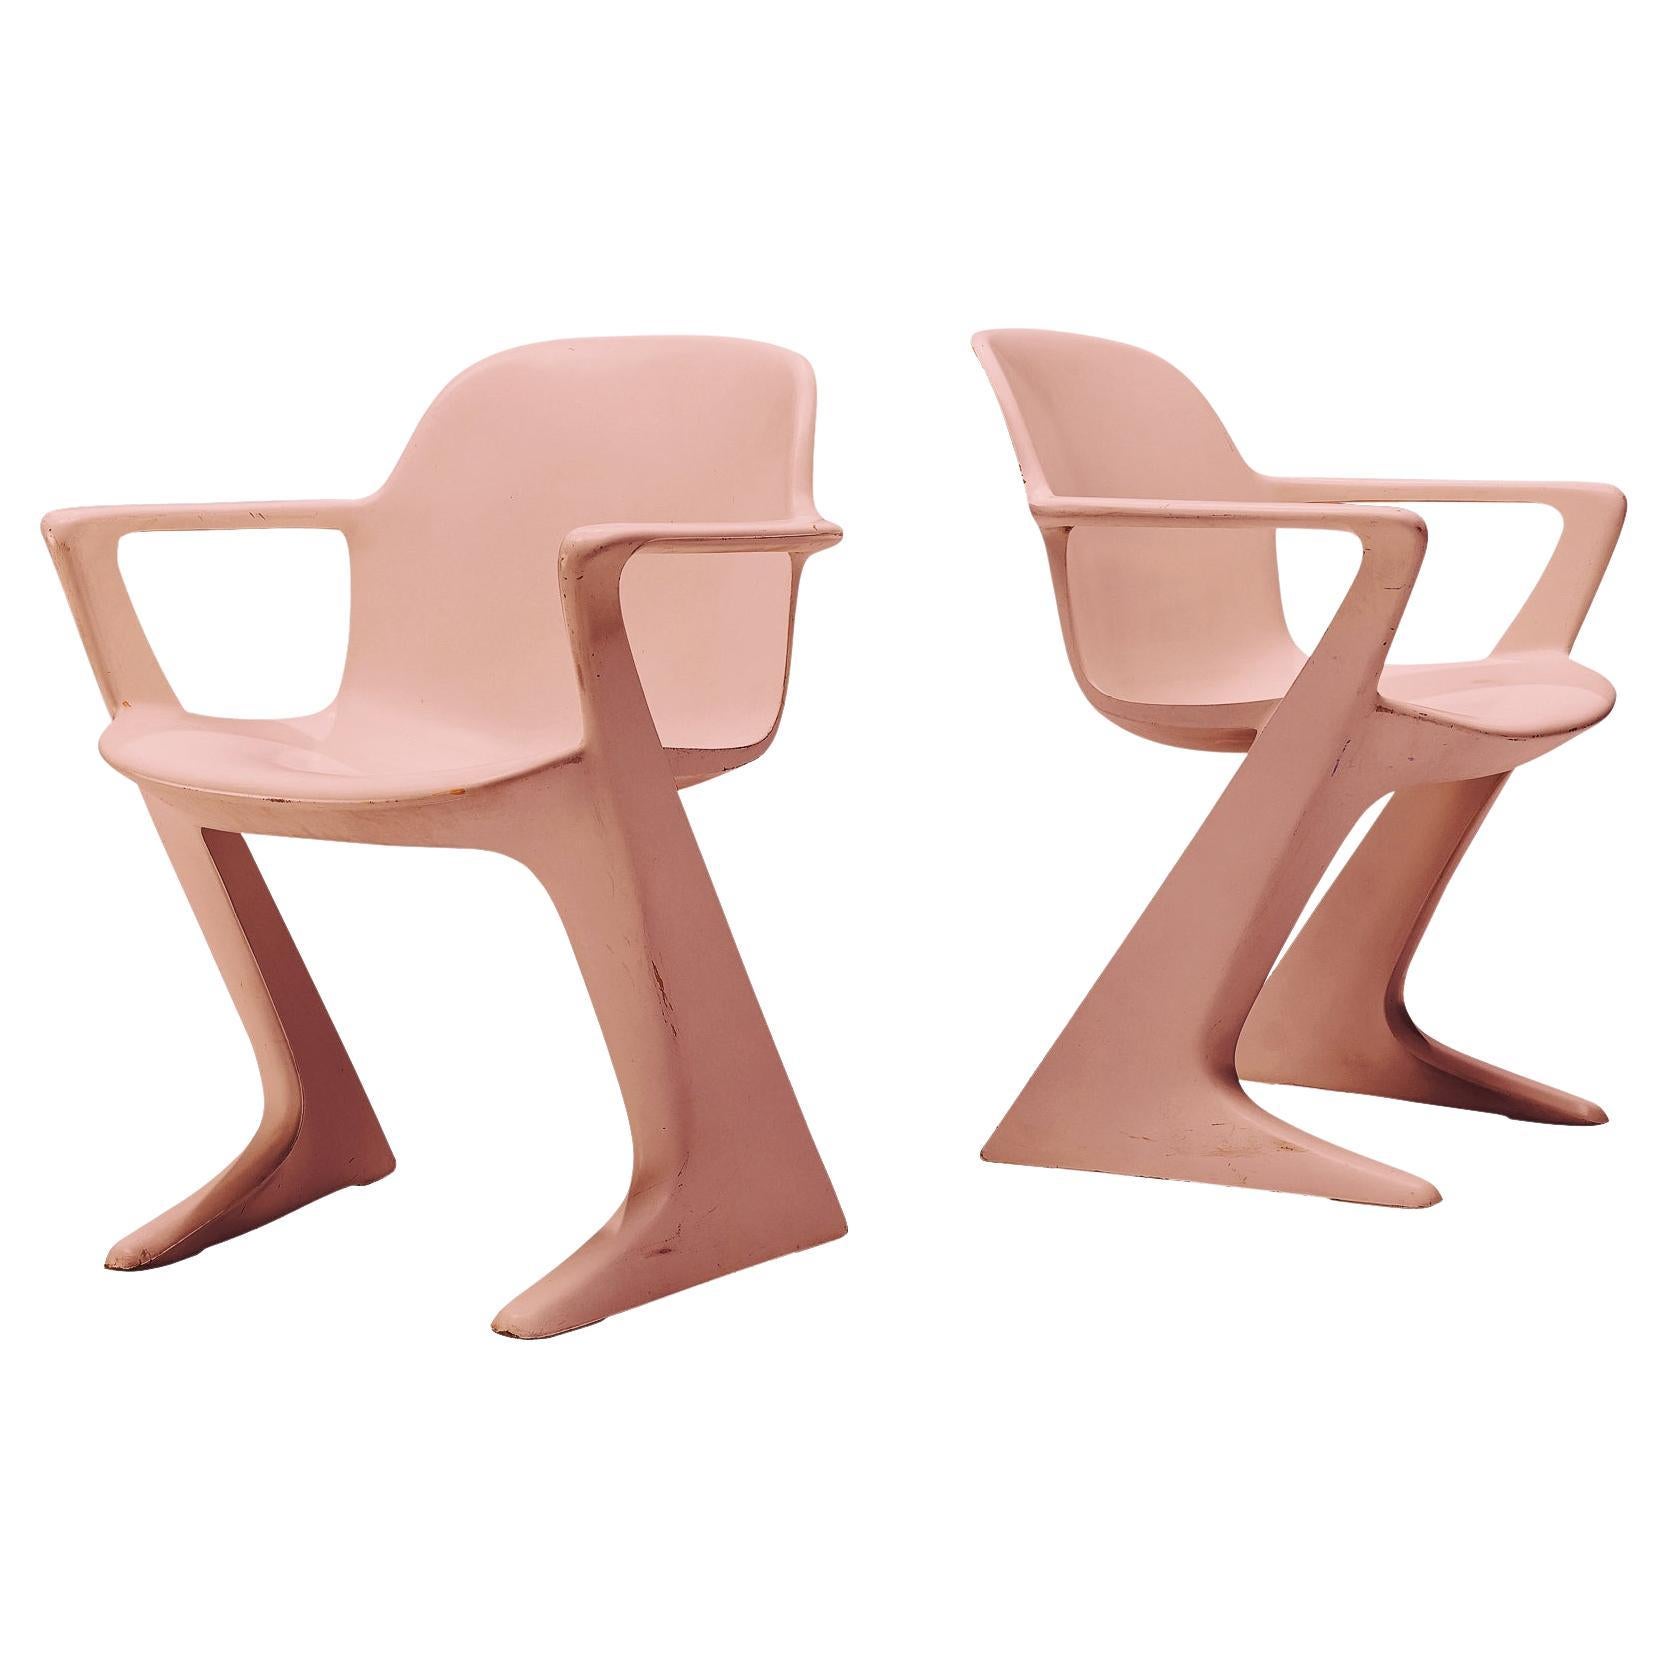 Ernst Moeckl 'Kangaroo' Dining Chairs in Soft Pink